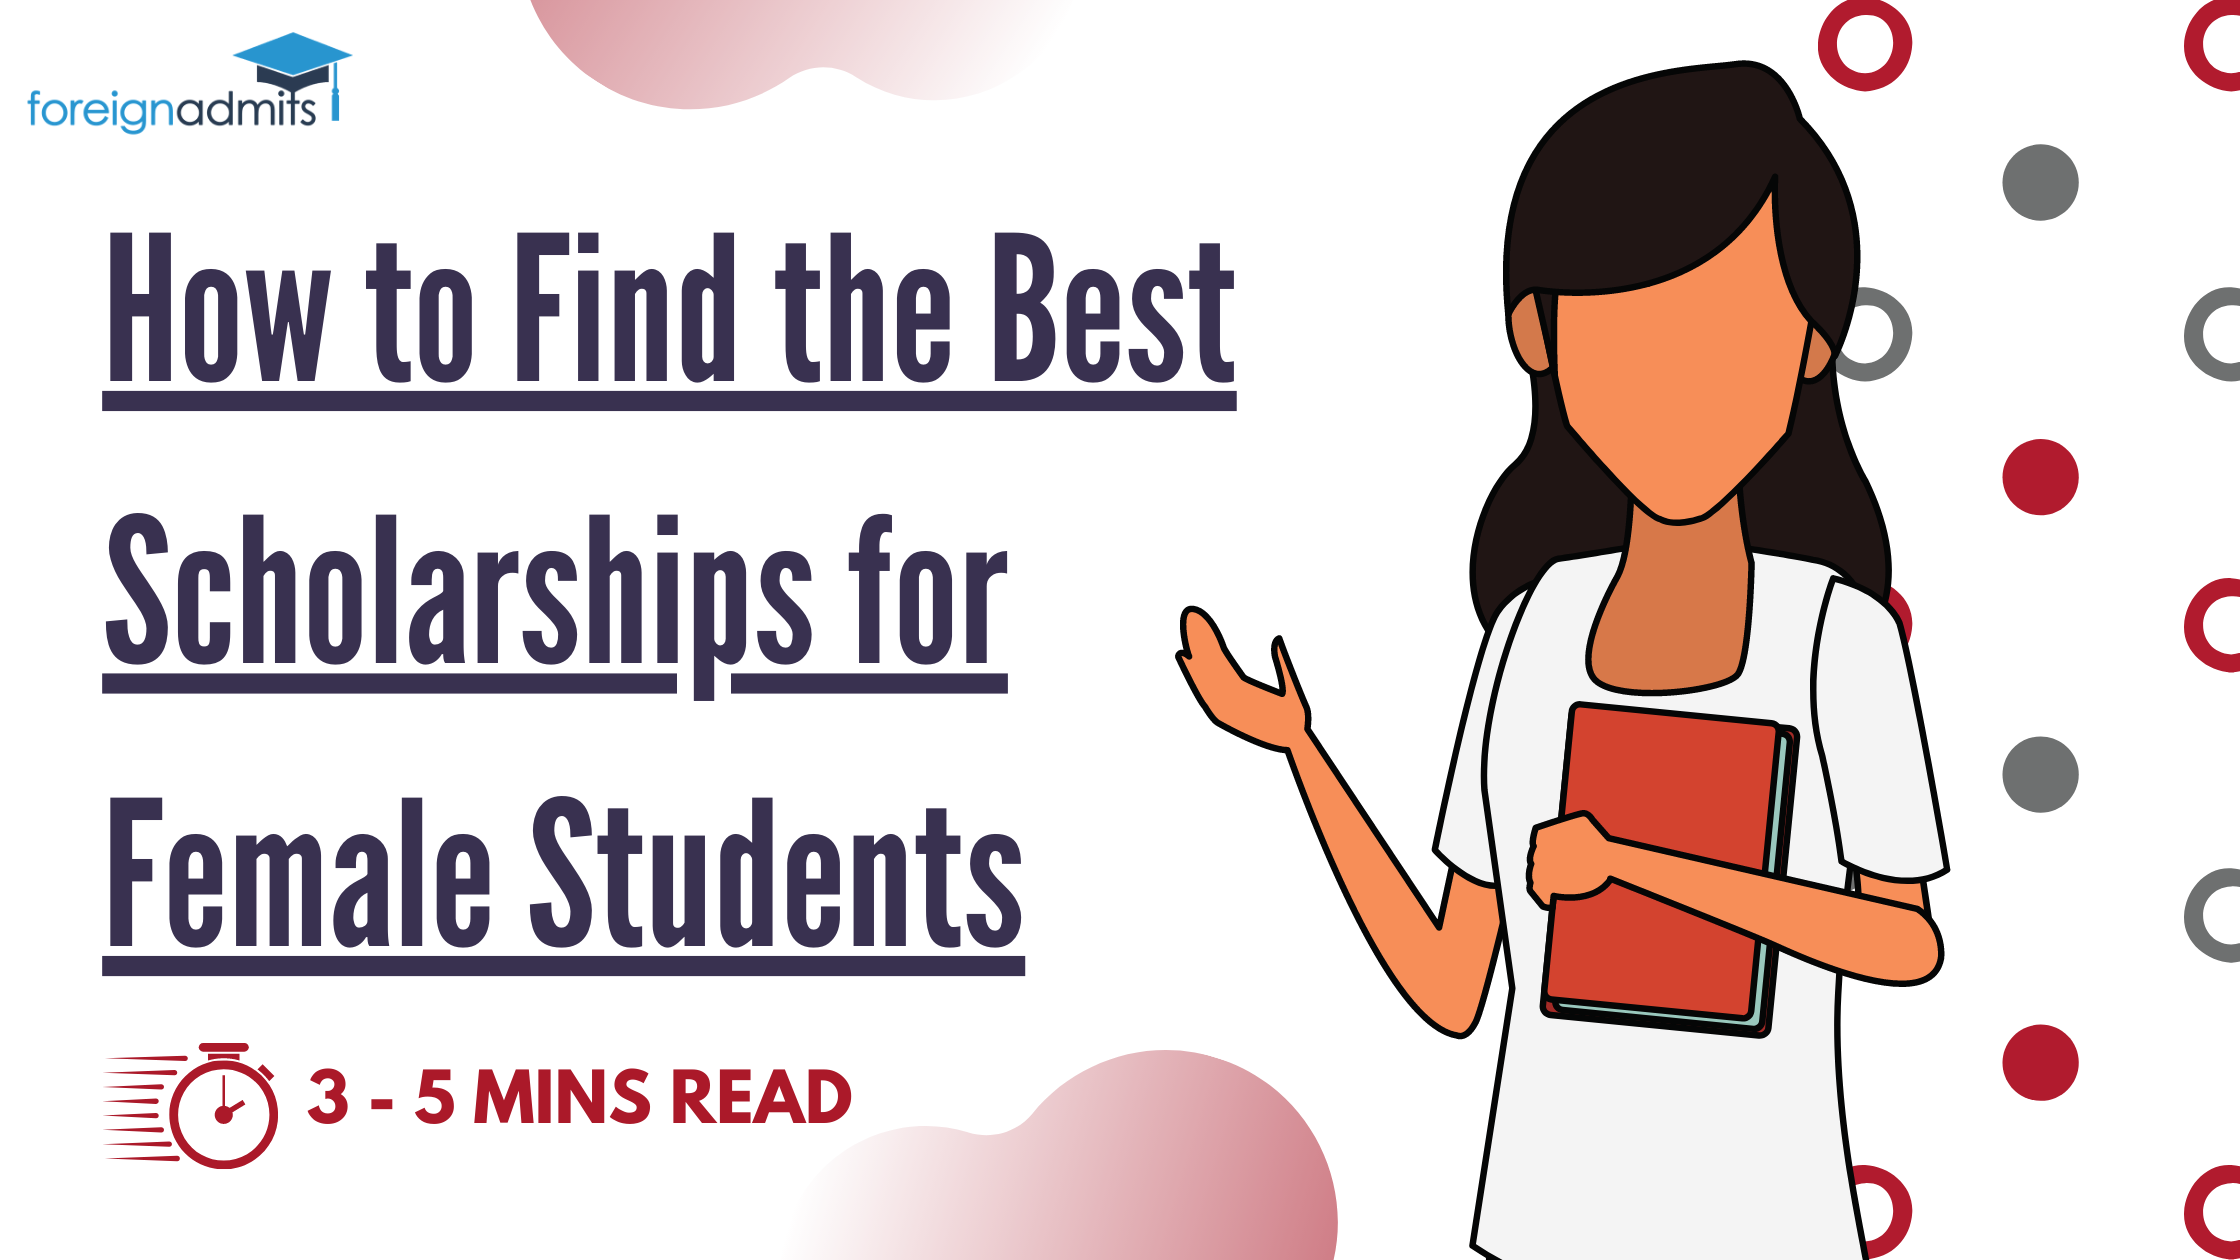 How to Find the Best Scholarships for Female Students